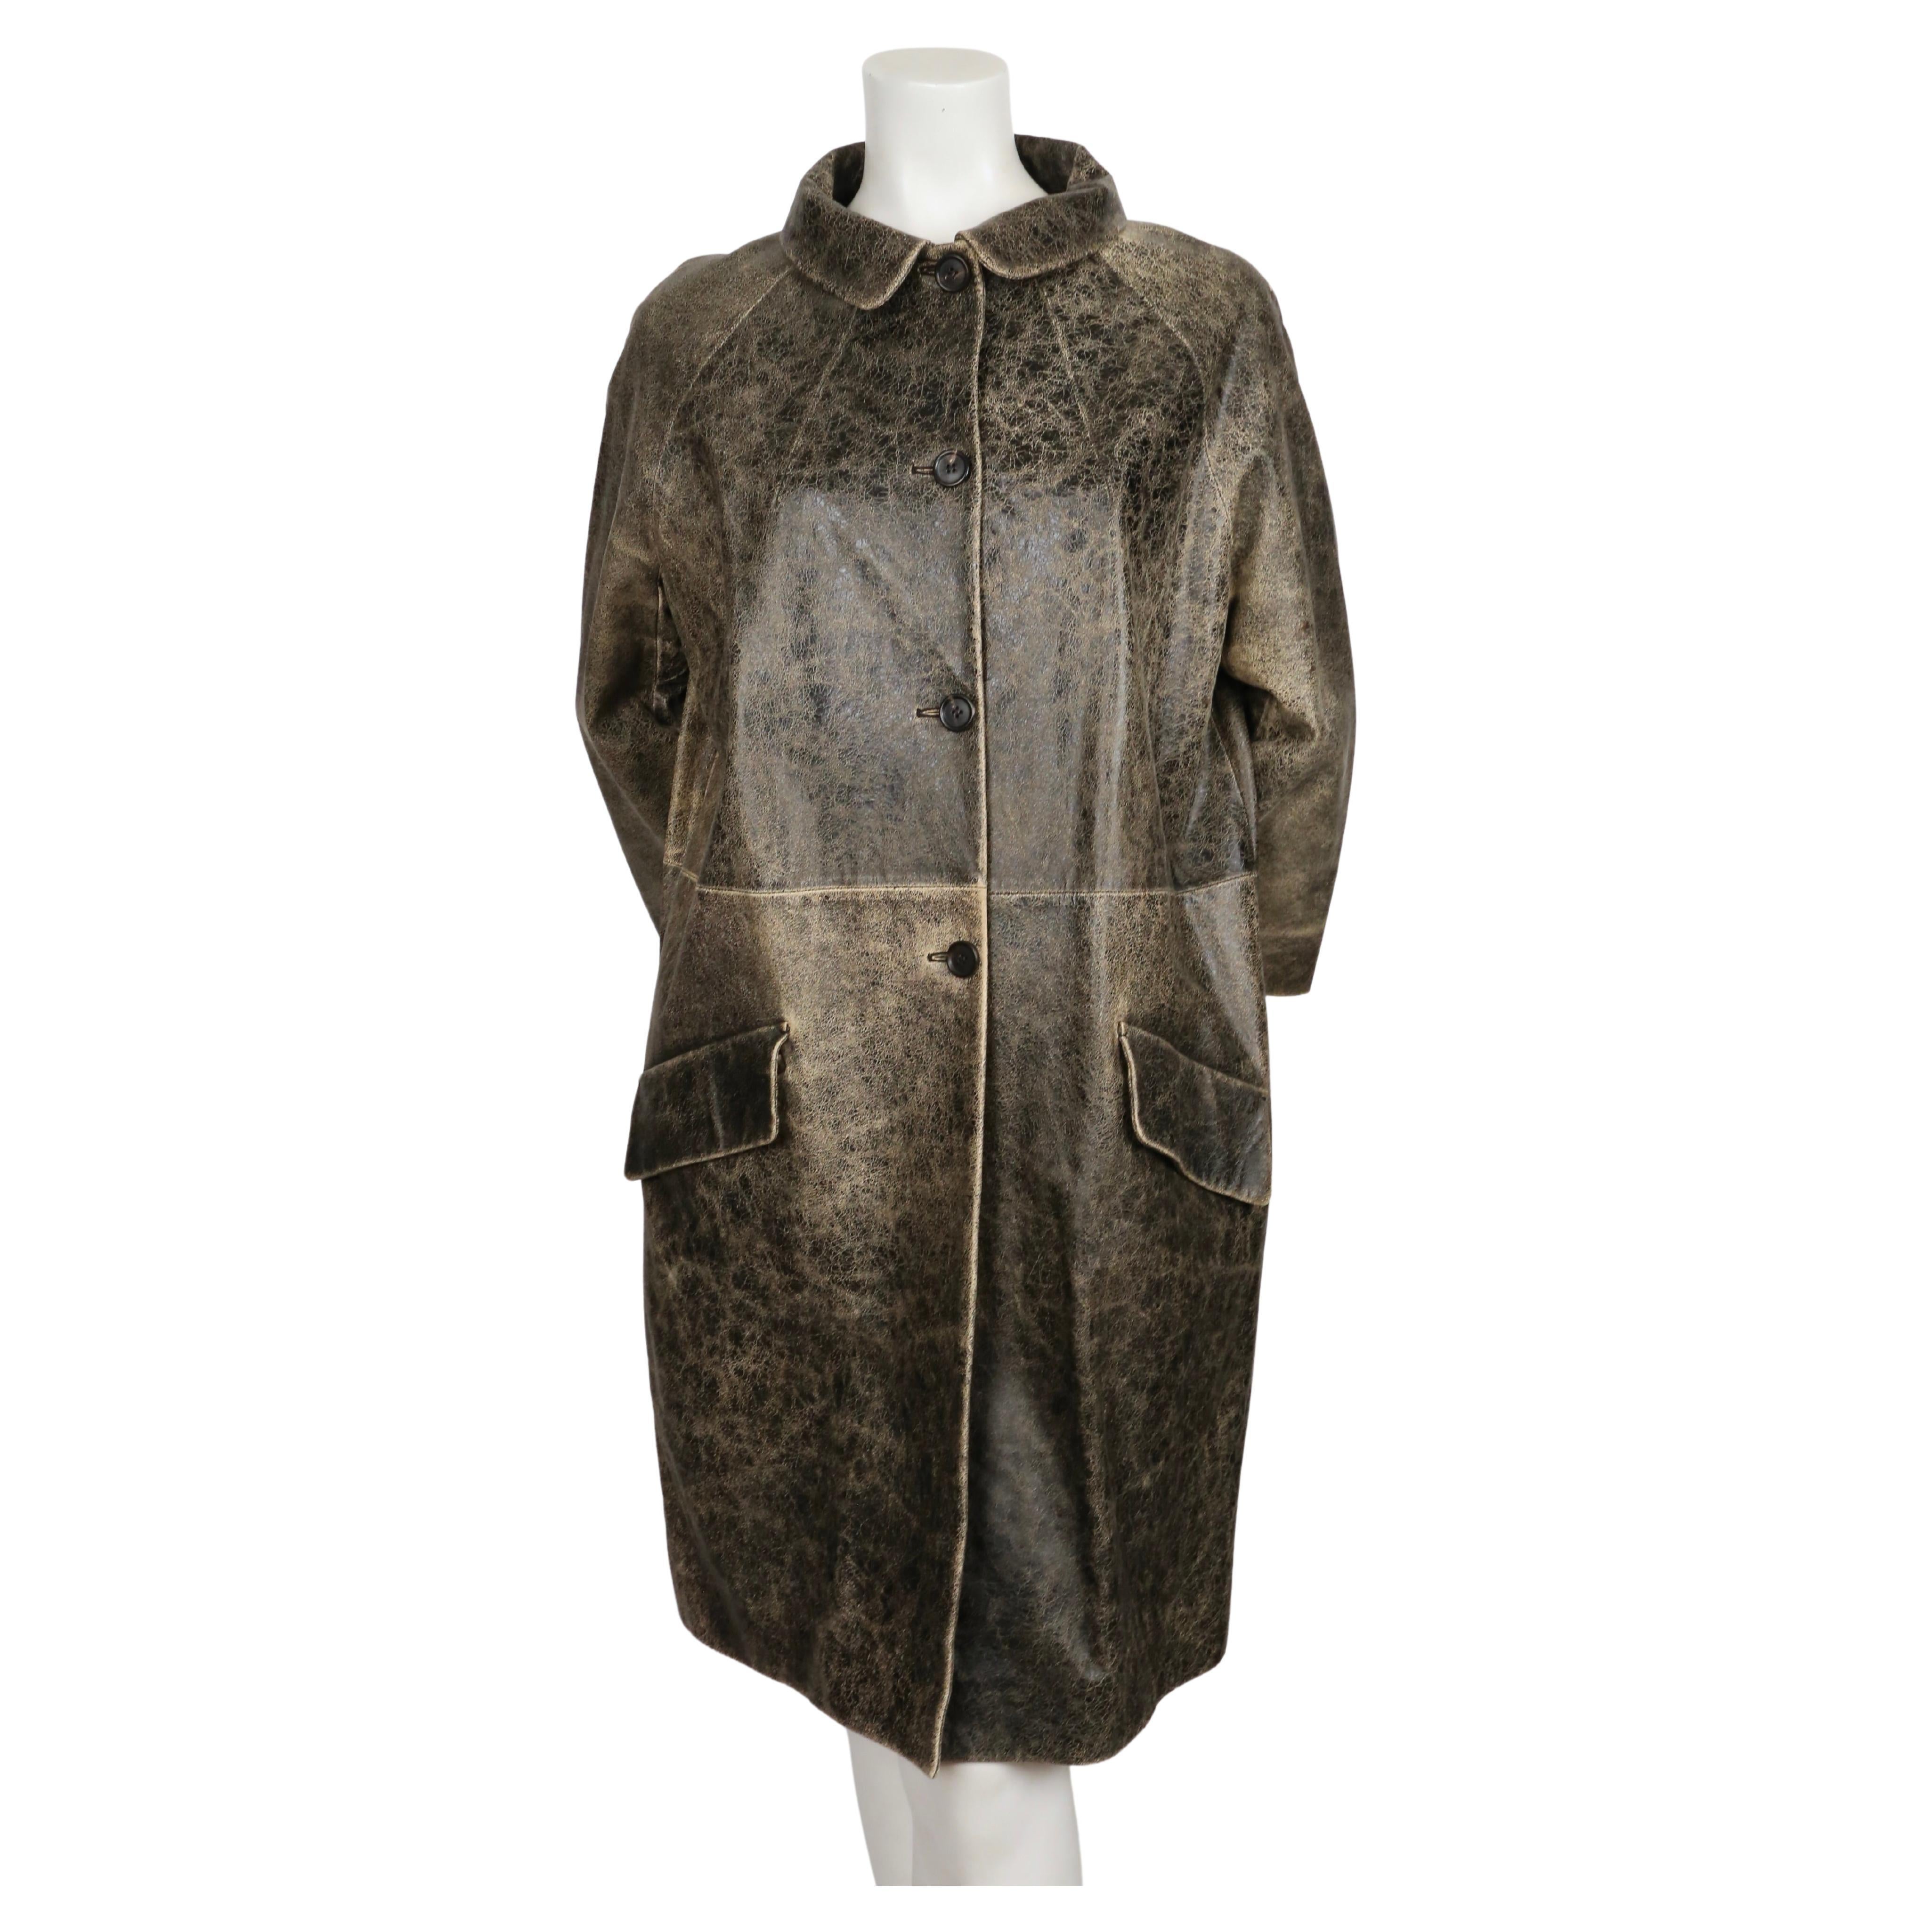 Very rare 'distressed' leather coat with three quarter sleeves designed by Miuccia Prada for  Miu Miu dating to around 2010. Very beautiful early 1960's silhouette. Italian size 42. Approximate measurements: bust 46